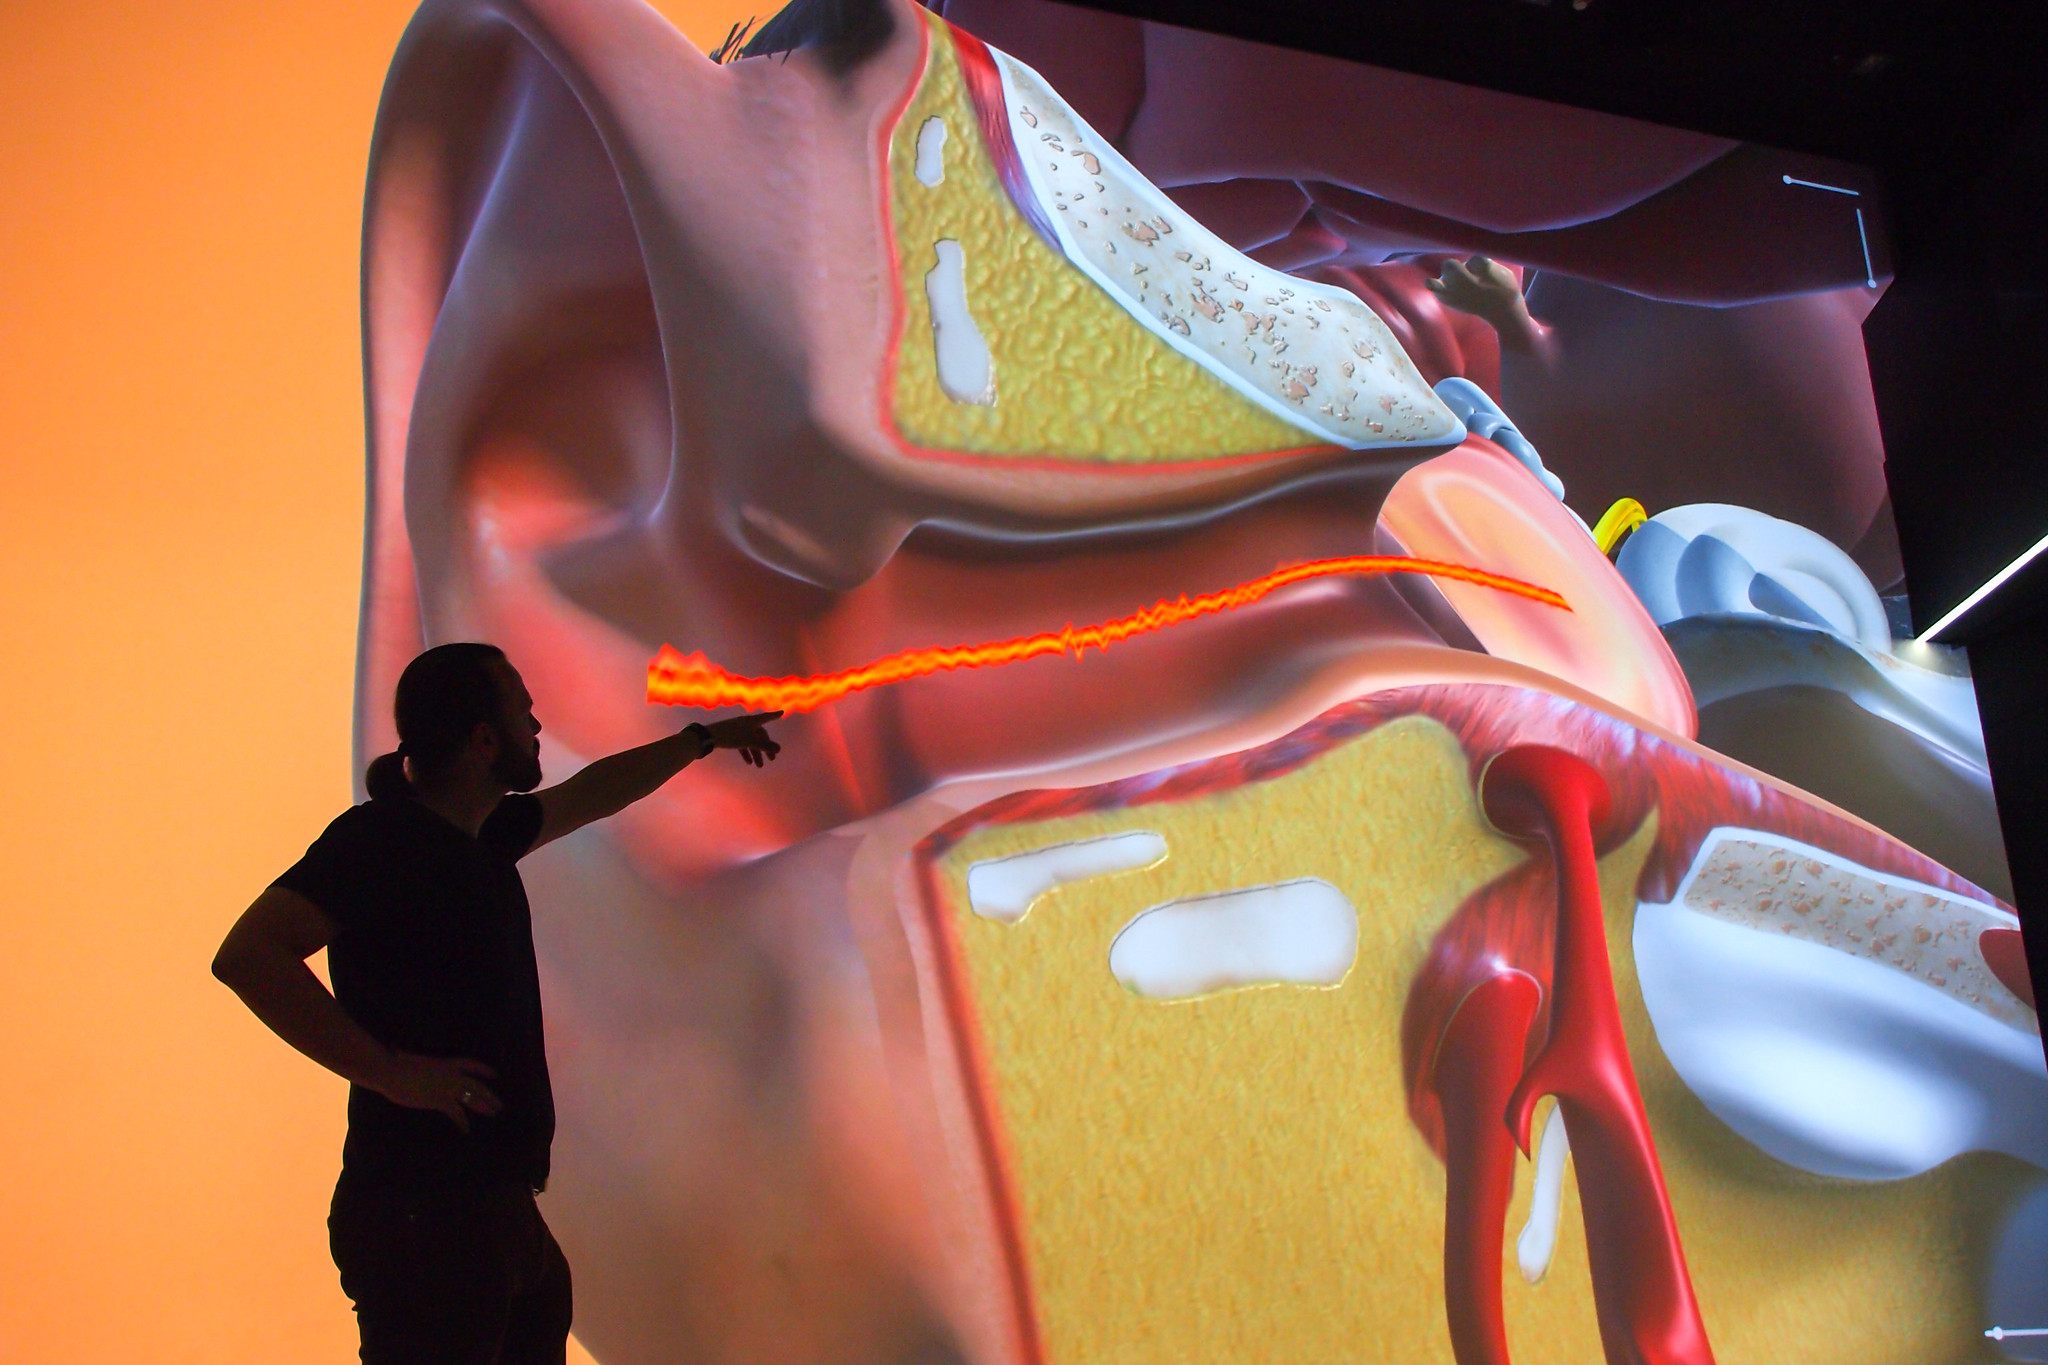 Human Bodies: The Universe Within / Ars Electronica Futurelab (AT)